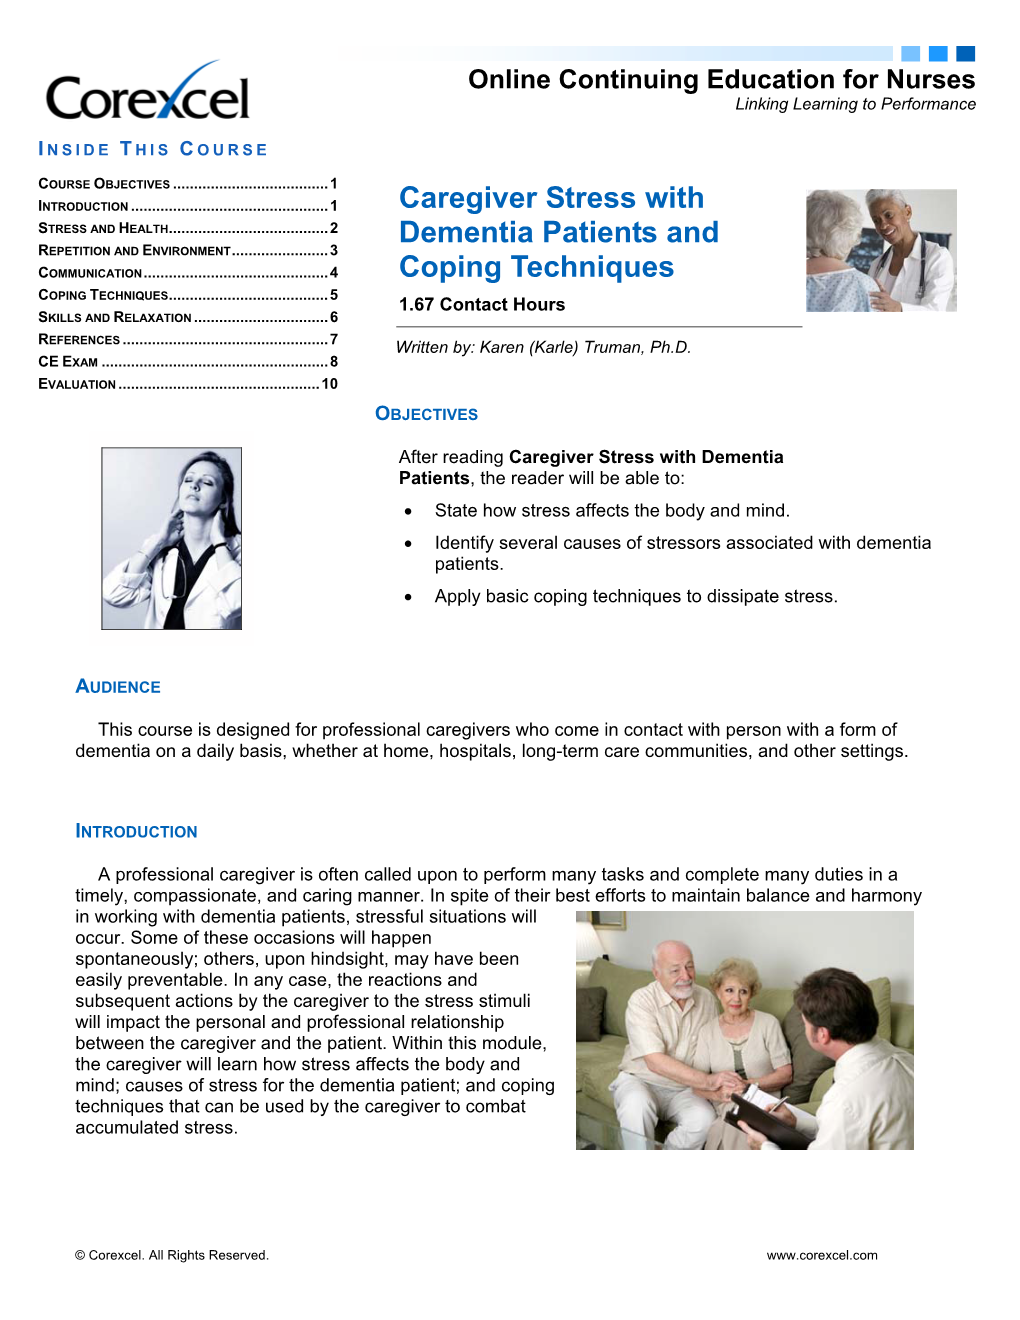 Caregiver Stress with Dementia Patients and Coping Techniques